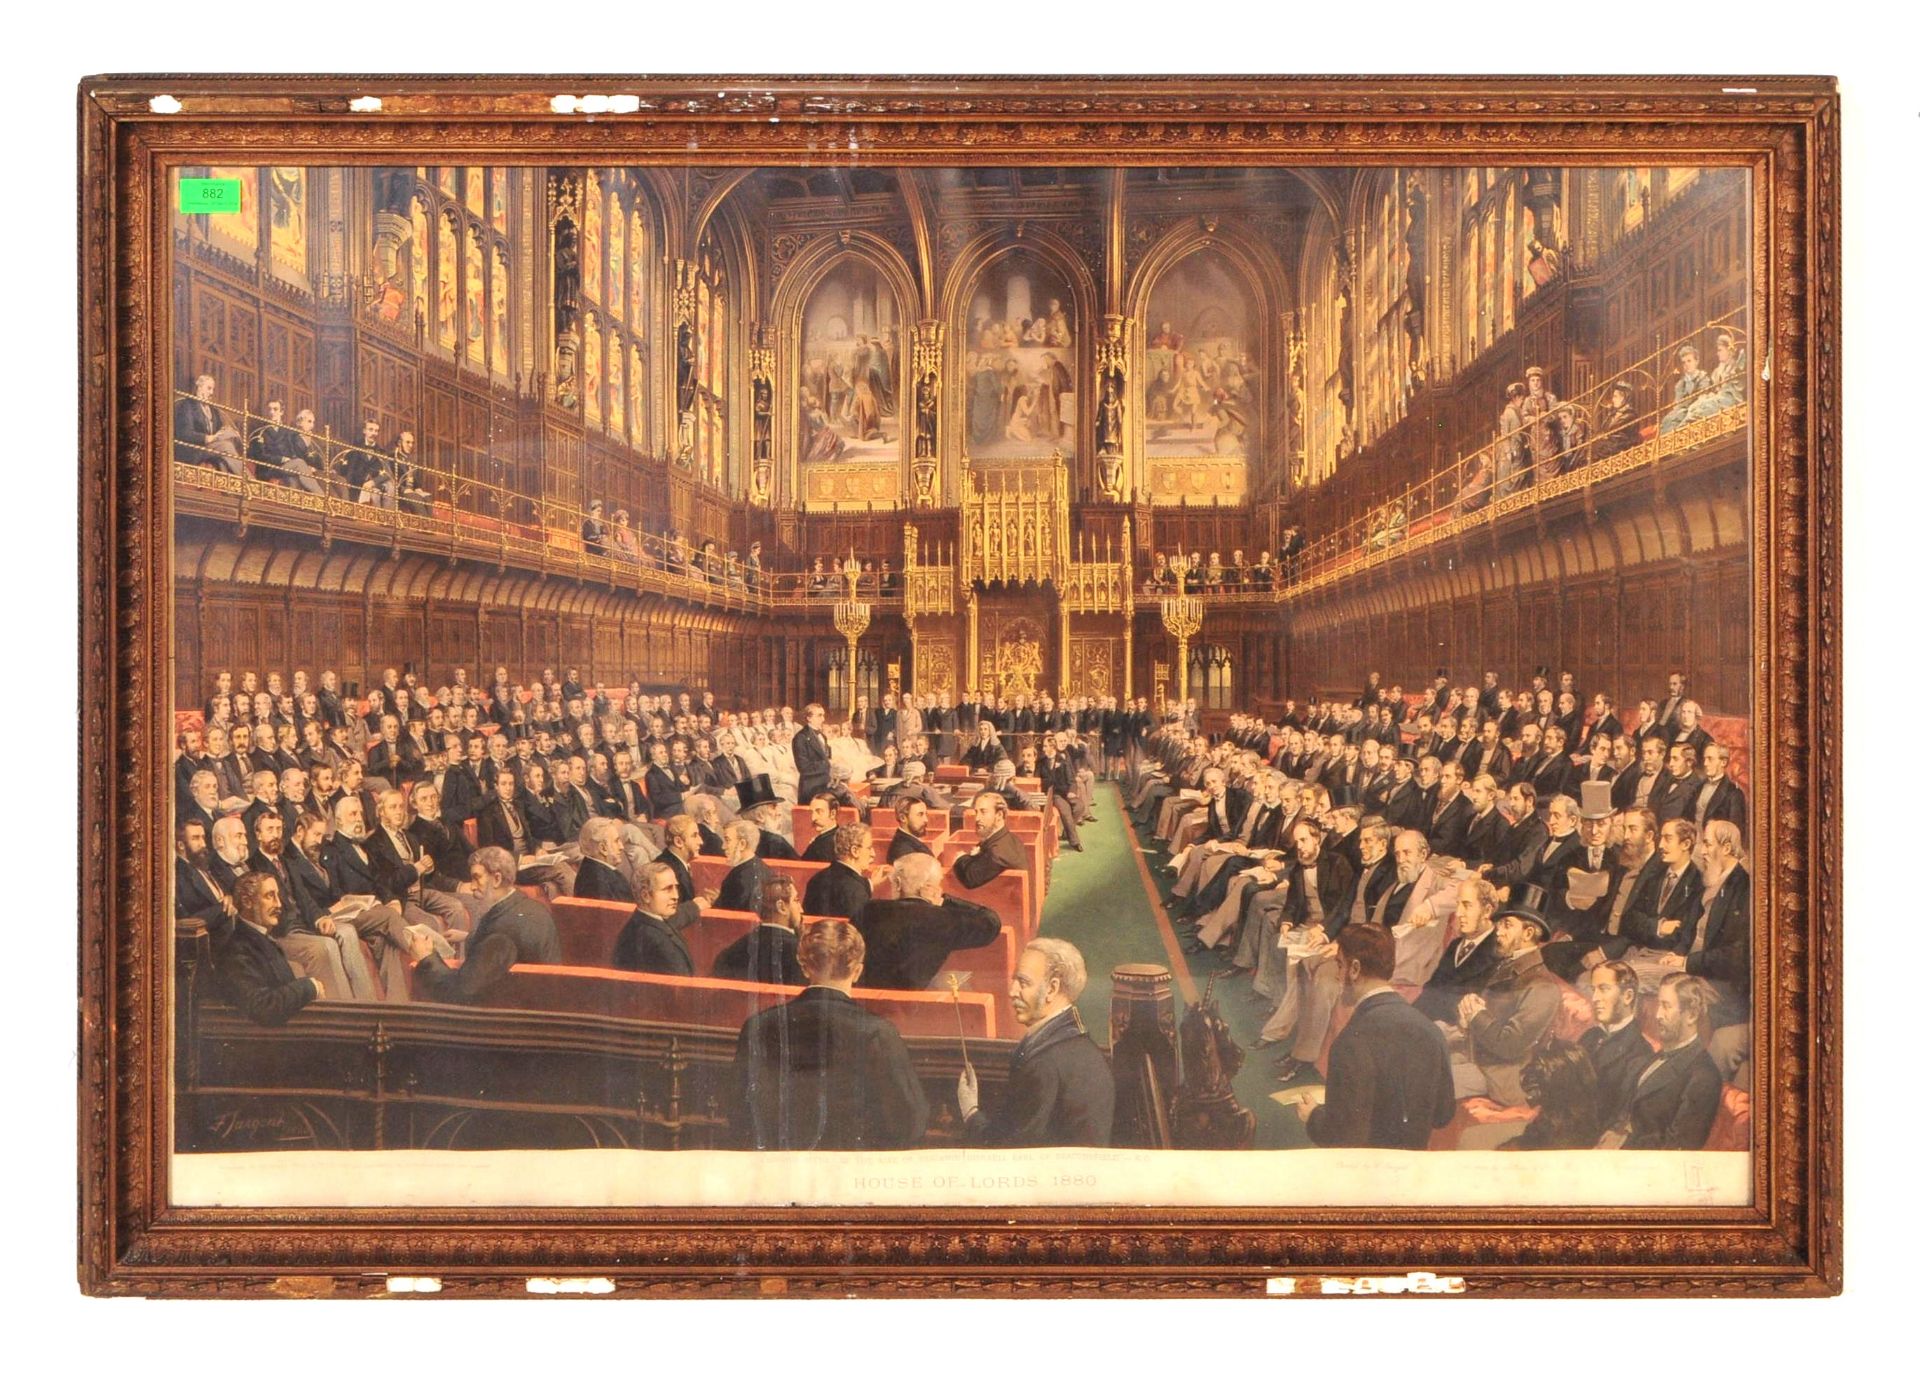 EARLY 20TH CENTURY HOUSES OF PARLIAMENT FRAMED PRINT - Image 2 of 8